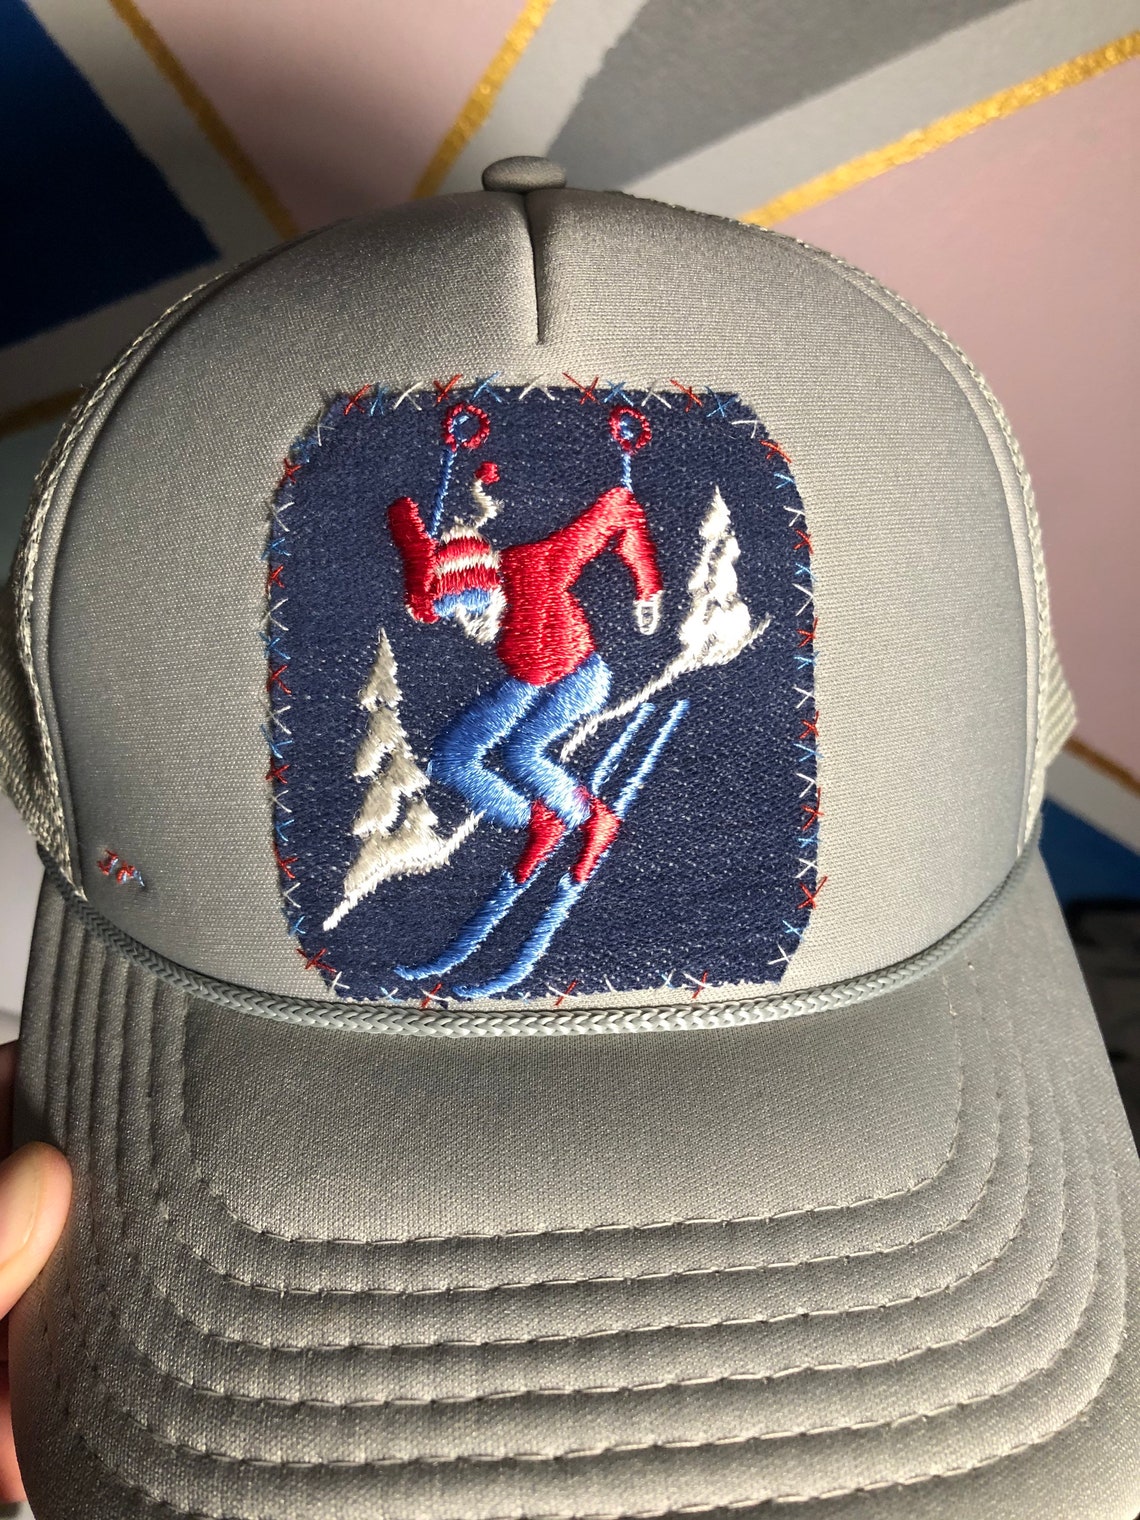 Vintage Skiing Patch Trucker Hat | Etsy